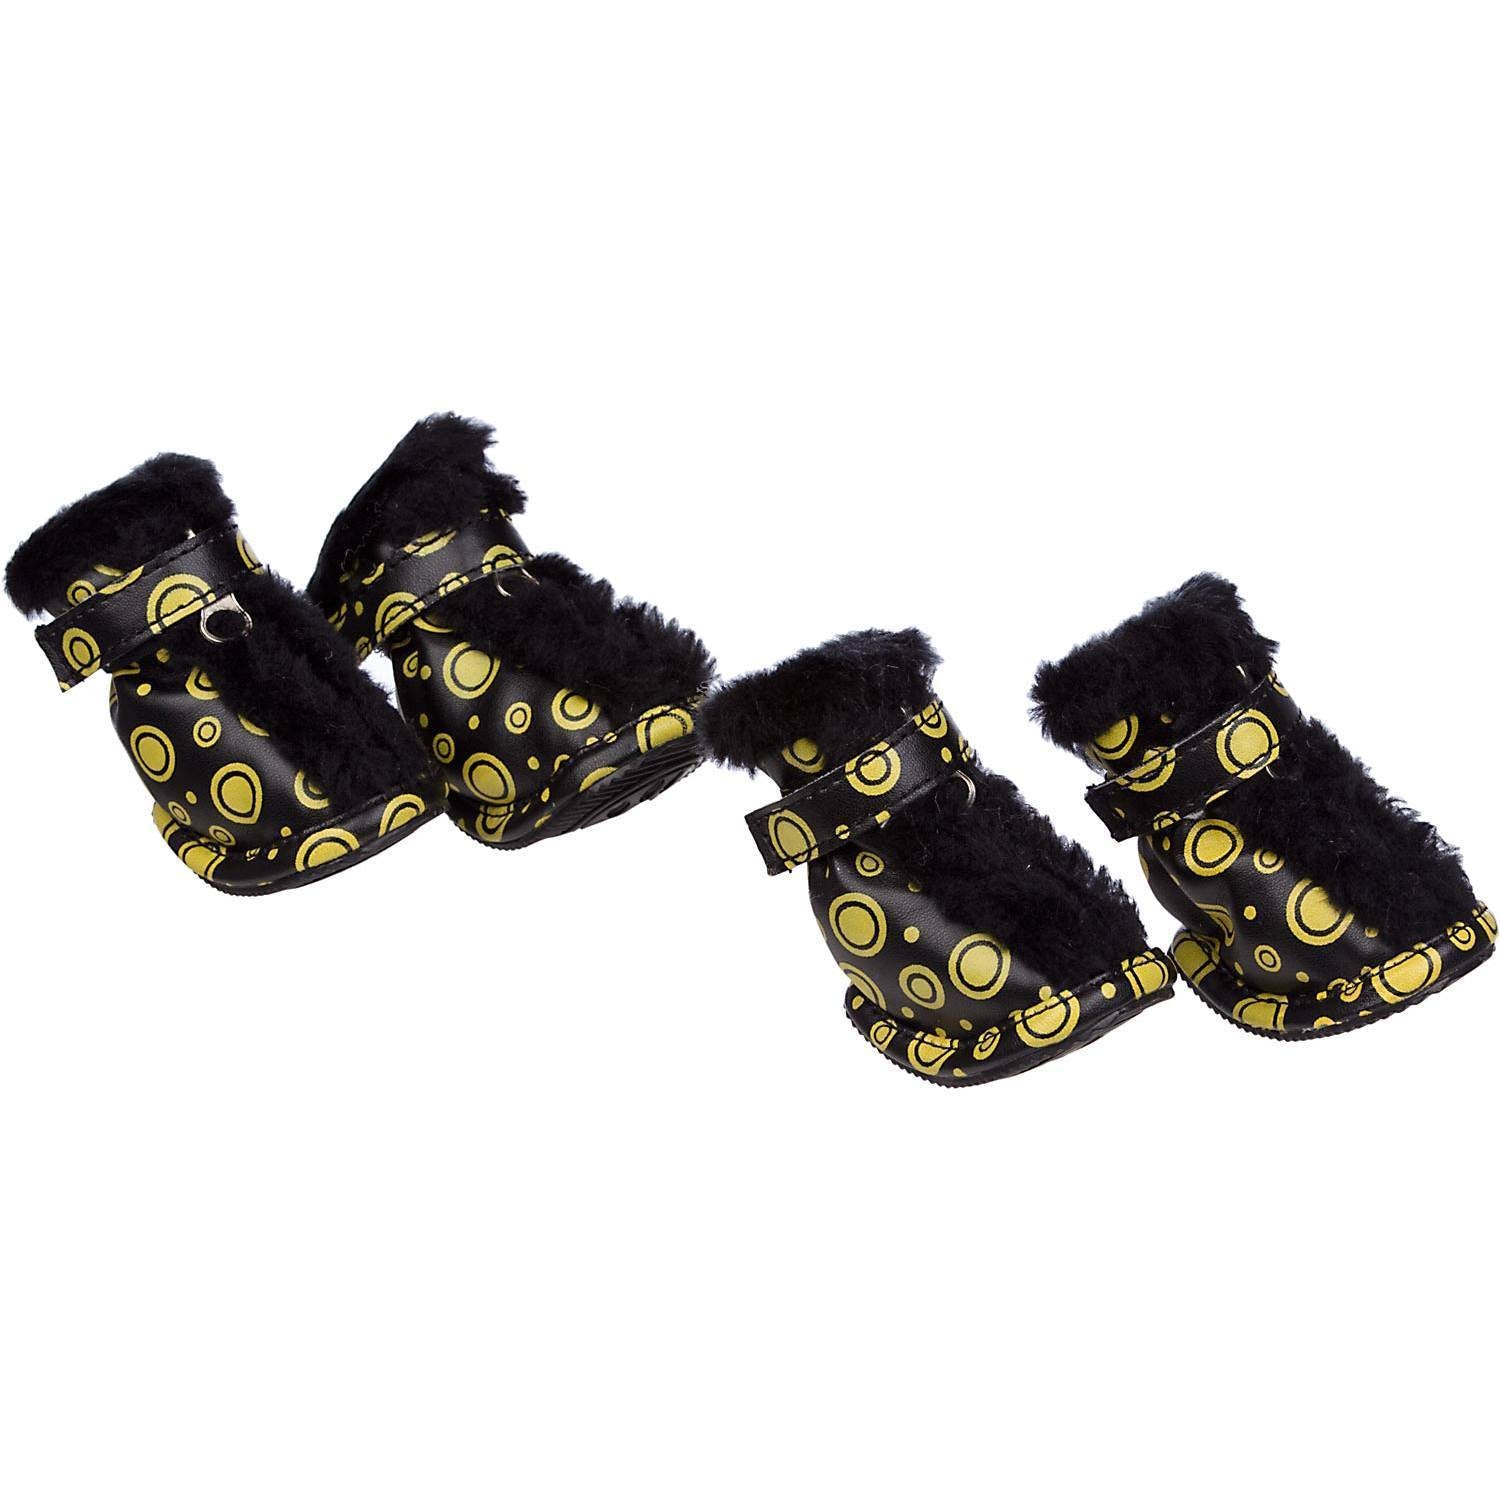 Pet Life ® Fur-Comfort 3M Insulated Fashion Fur and PVC Waterproof Winter Dog Boots - Set of 4 X-Small Black & Yellow